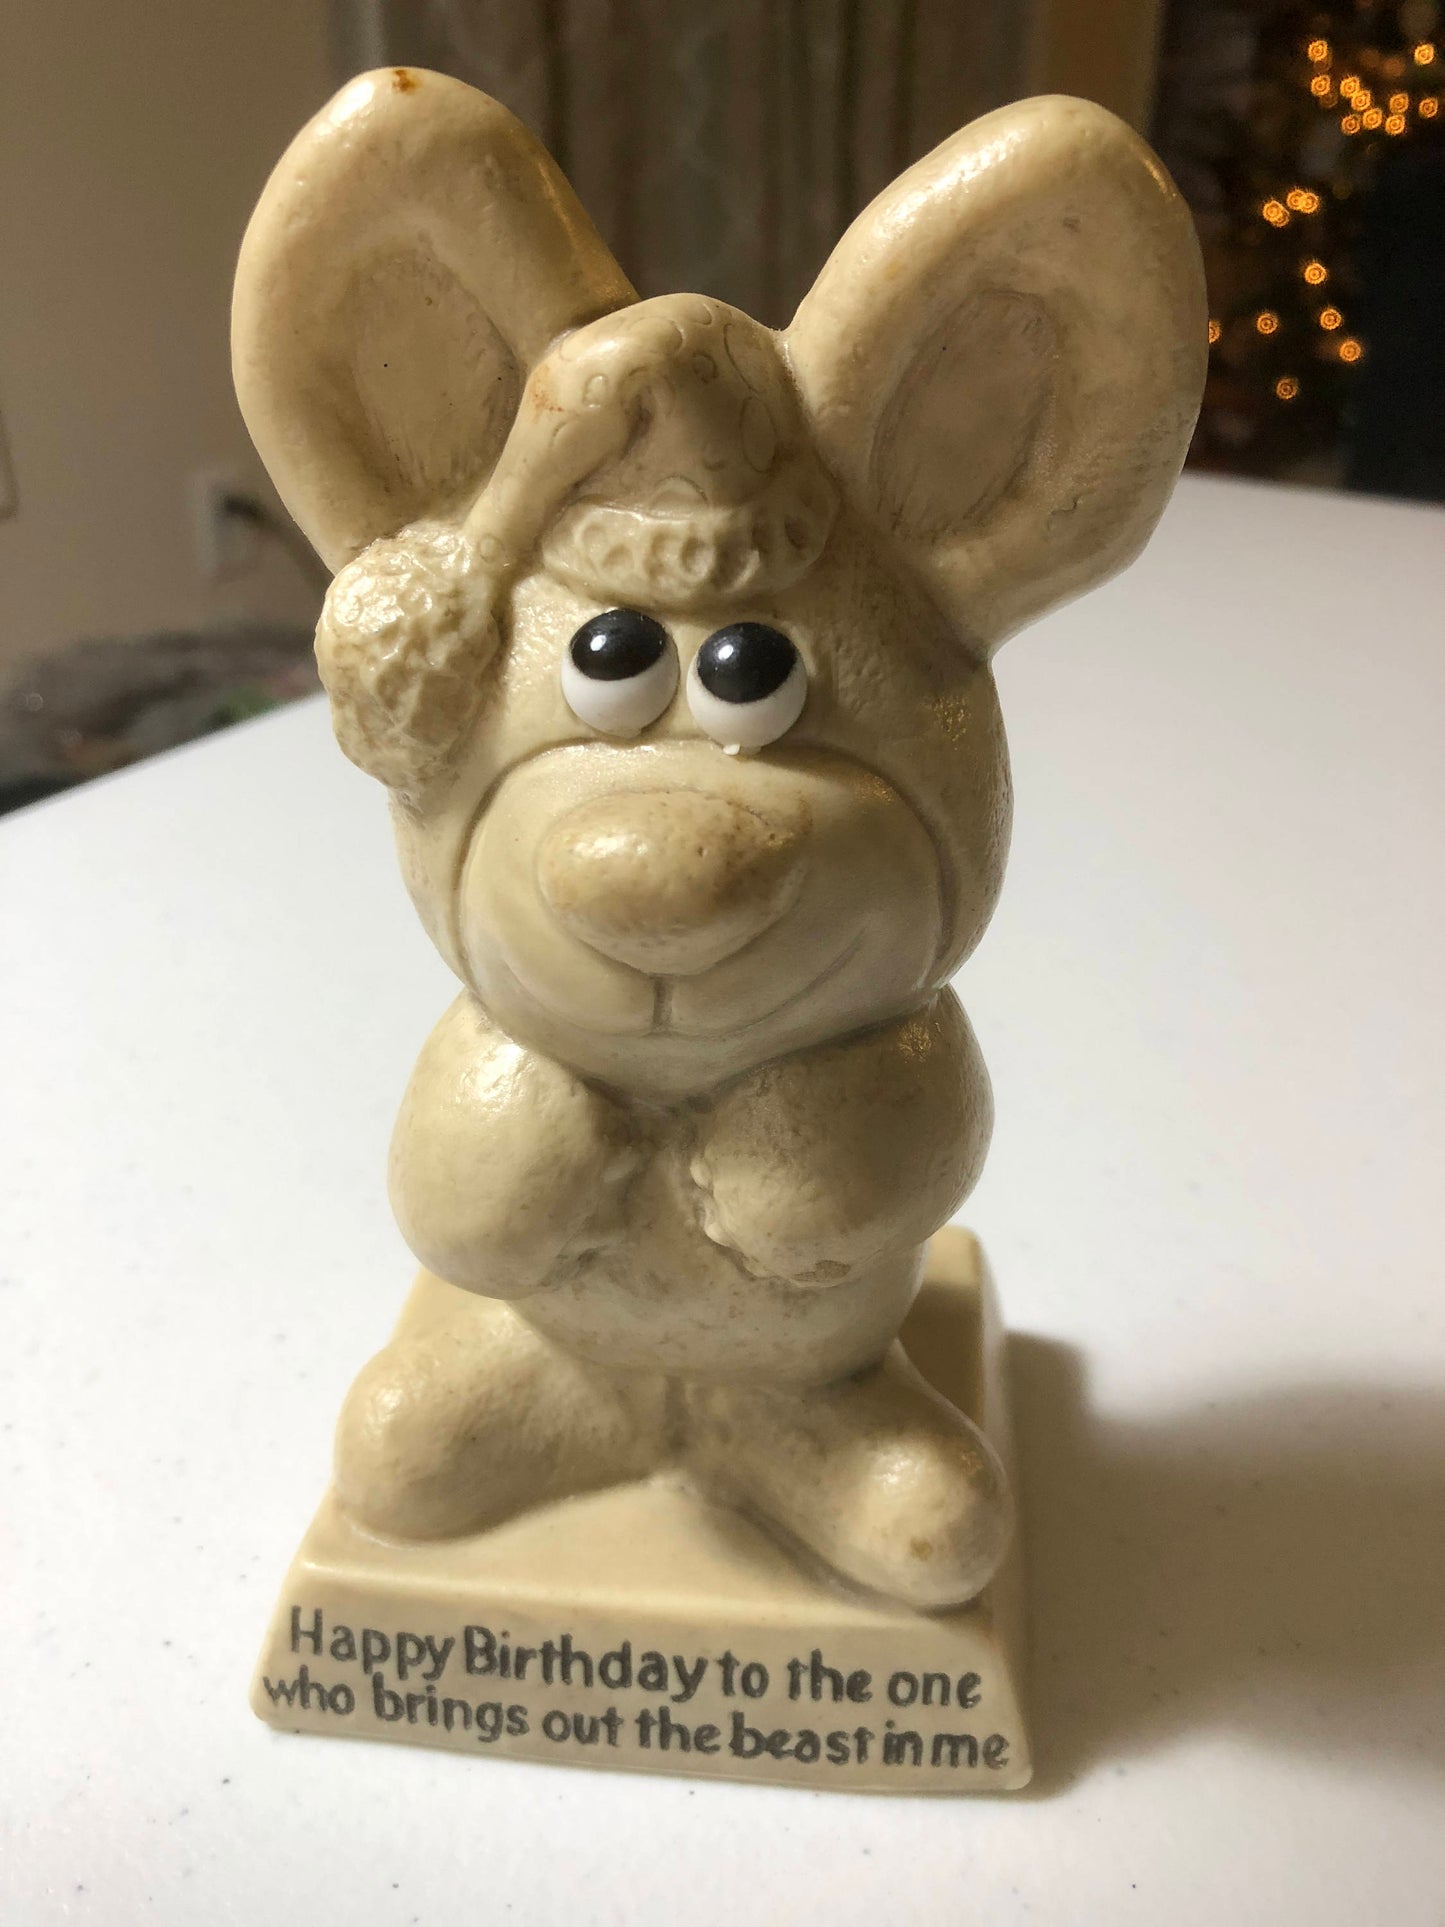 W.R. Berrie's Figurine "Happy Birthday to the One Who Brings out the Best in Me", Vintage Collectible 1970